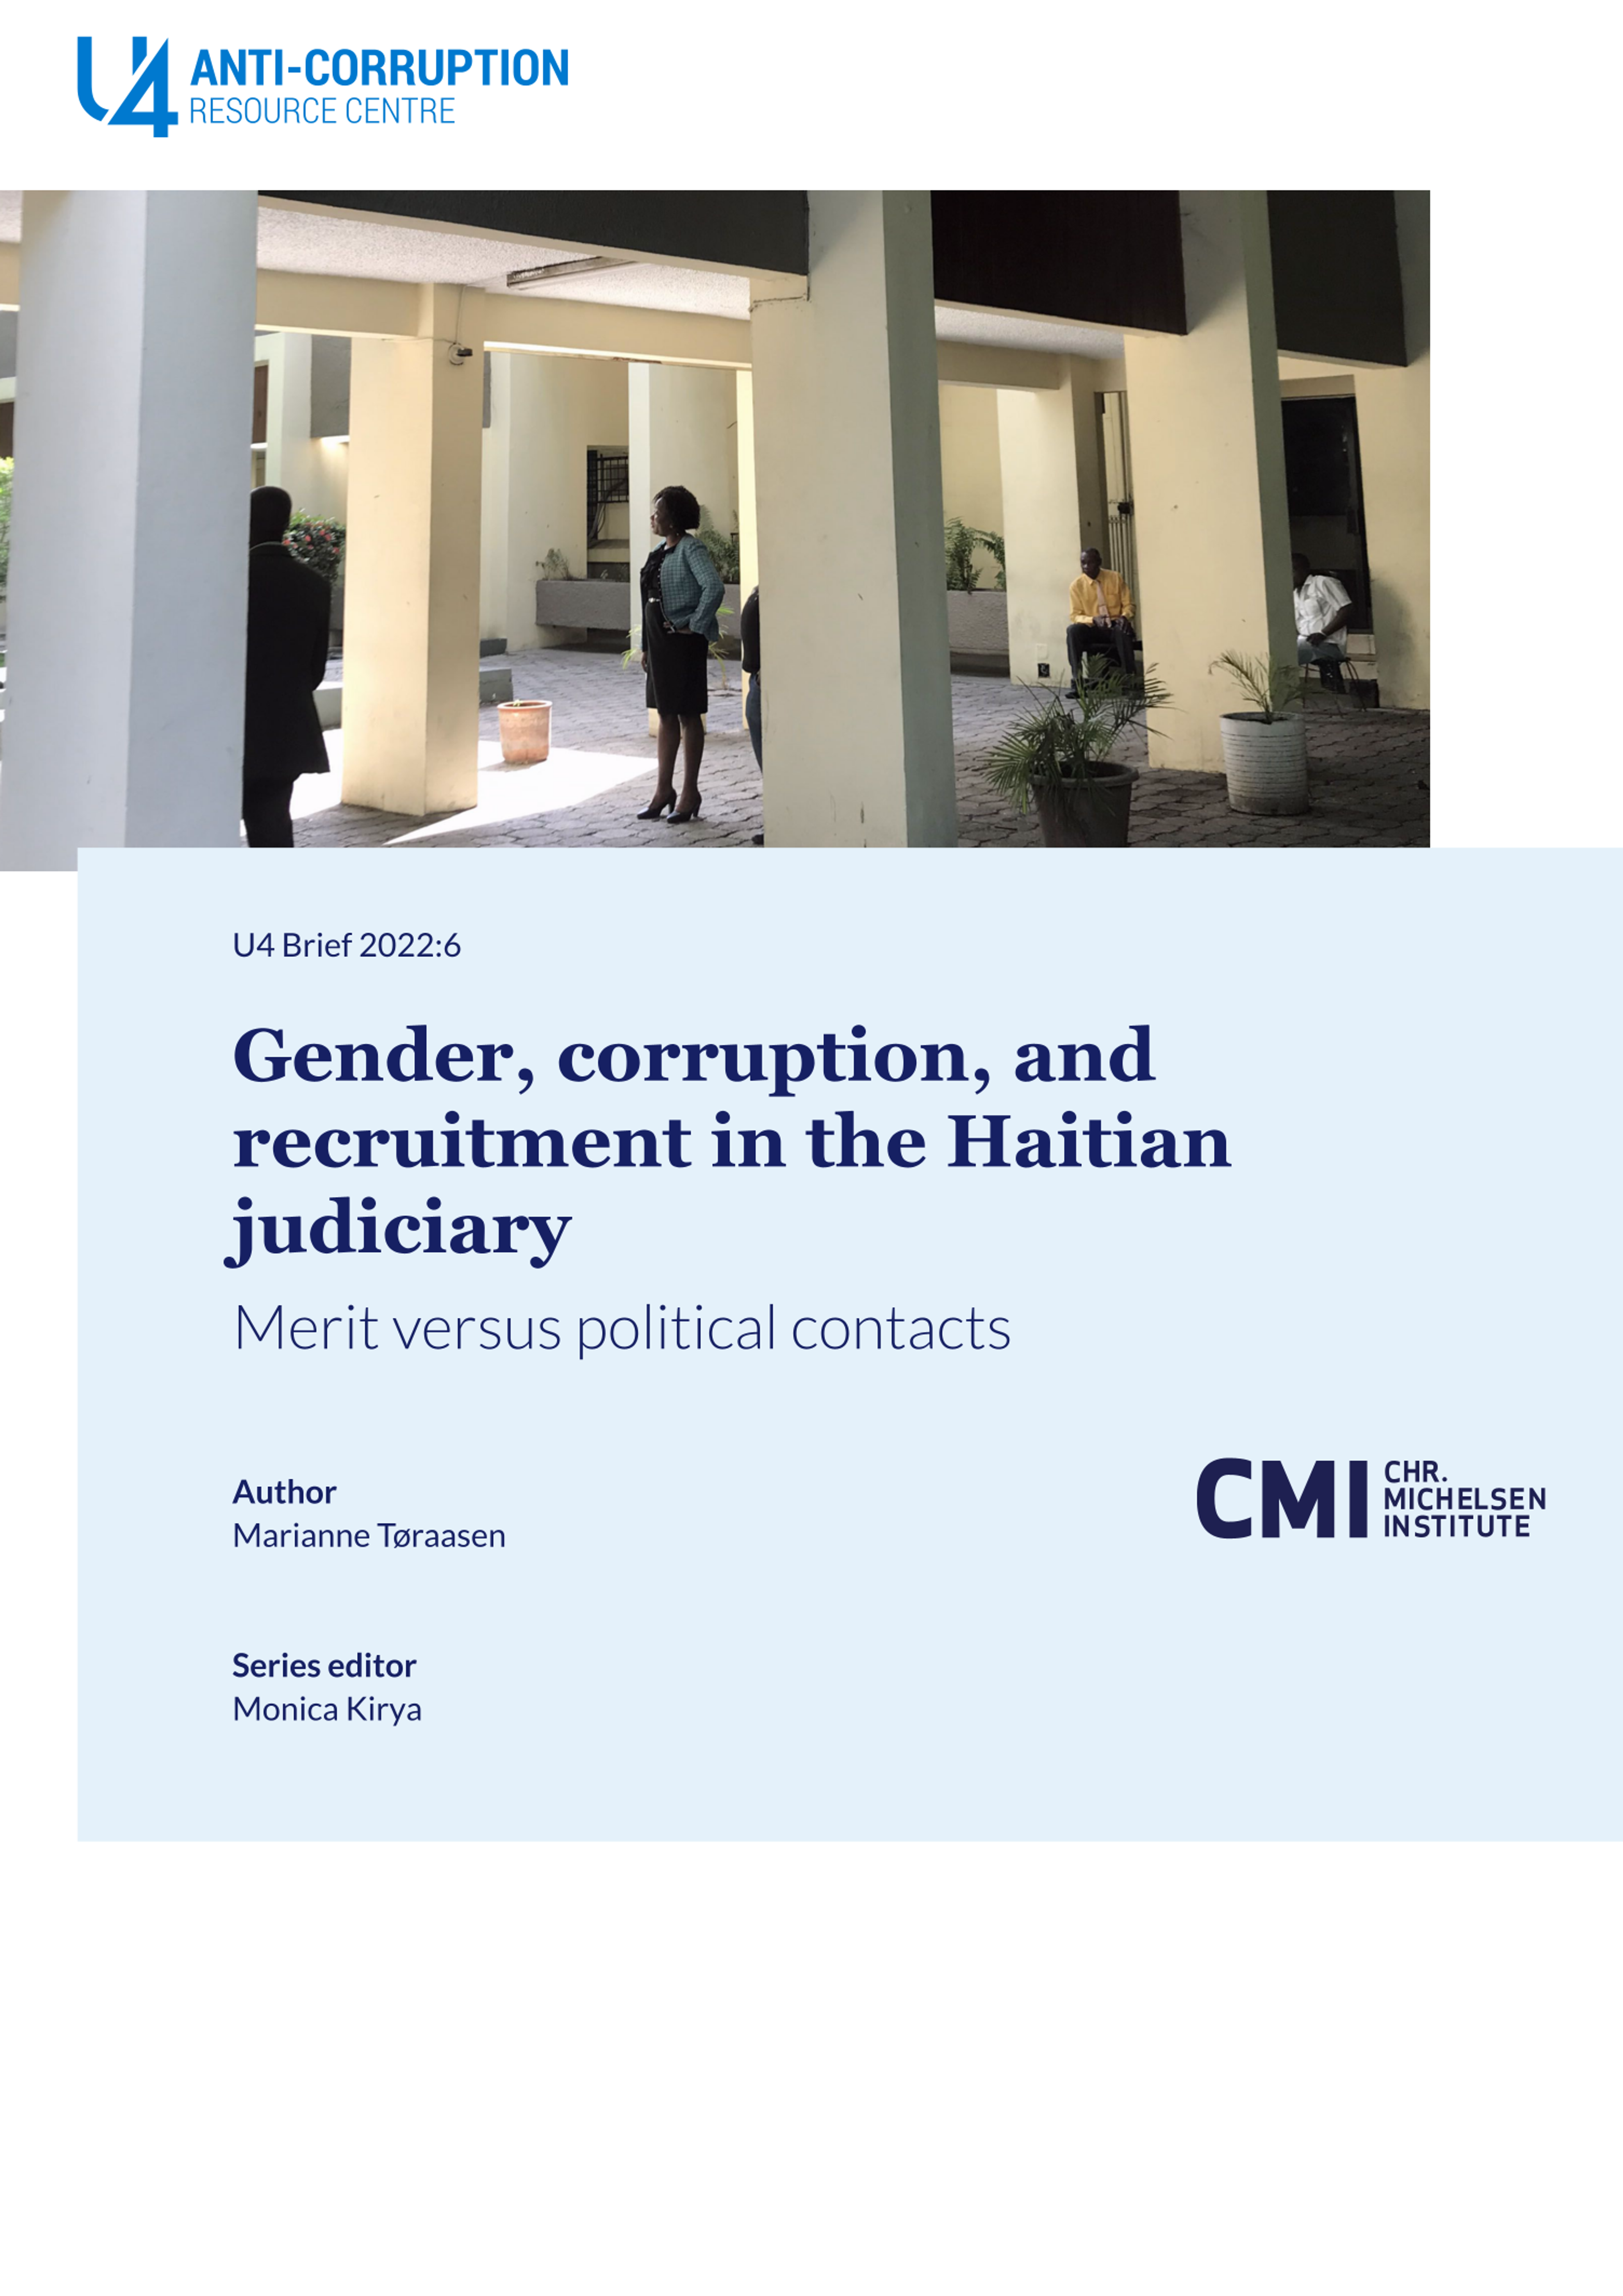 Gender, corruption, and recruitment in the Haitian judiciary